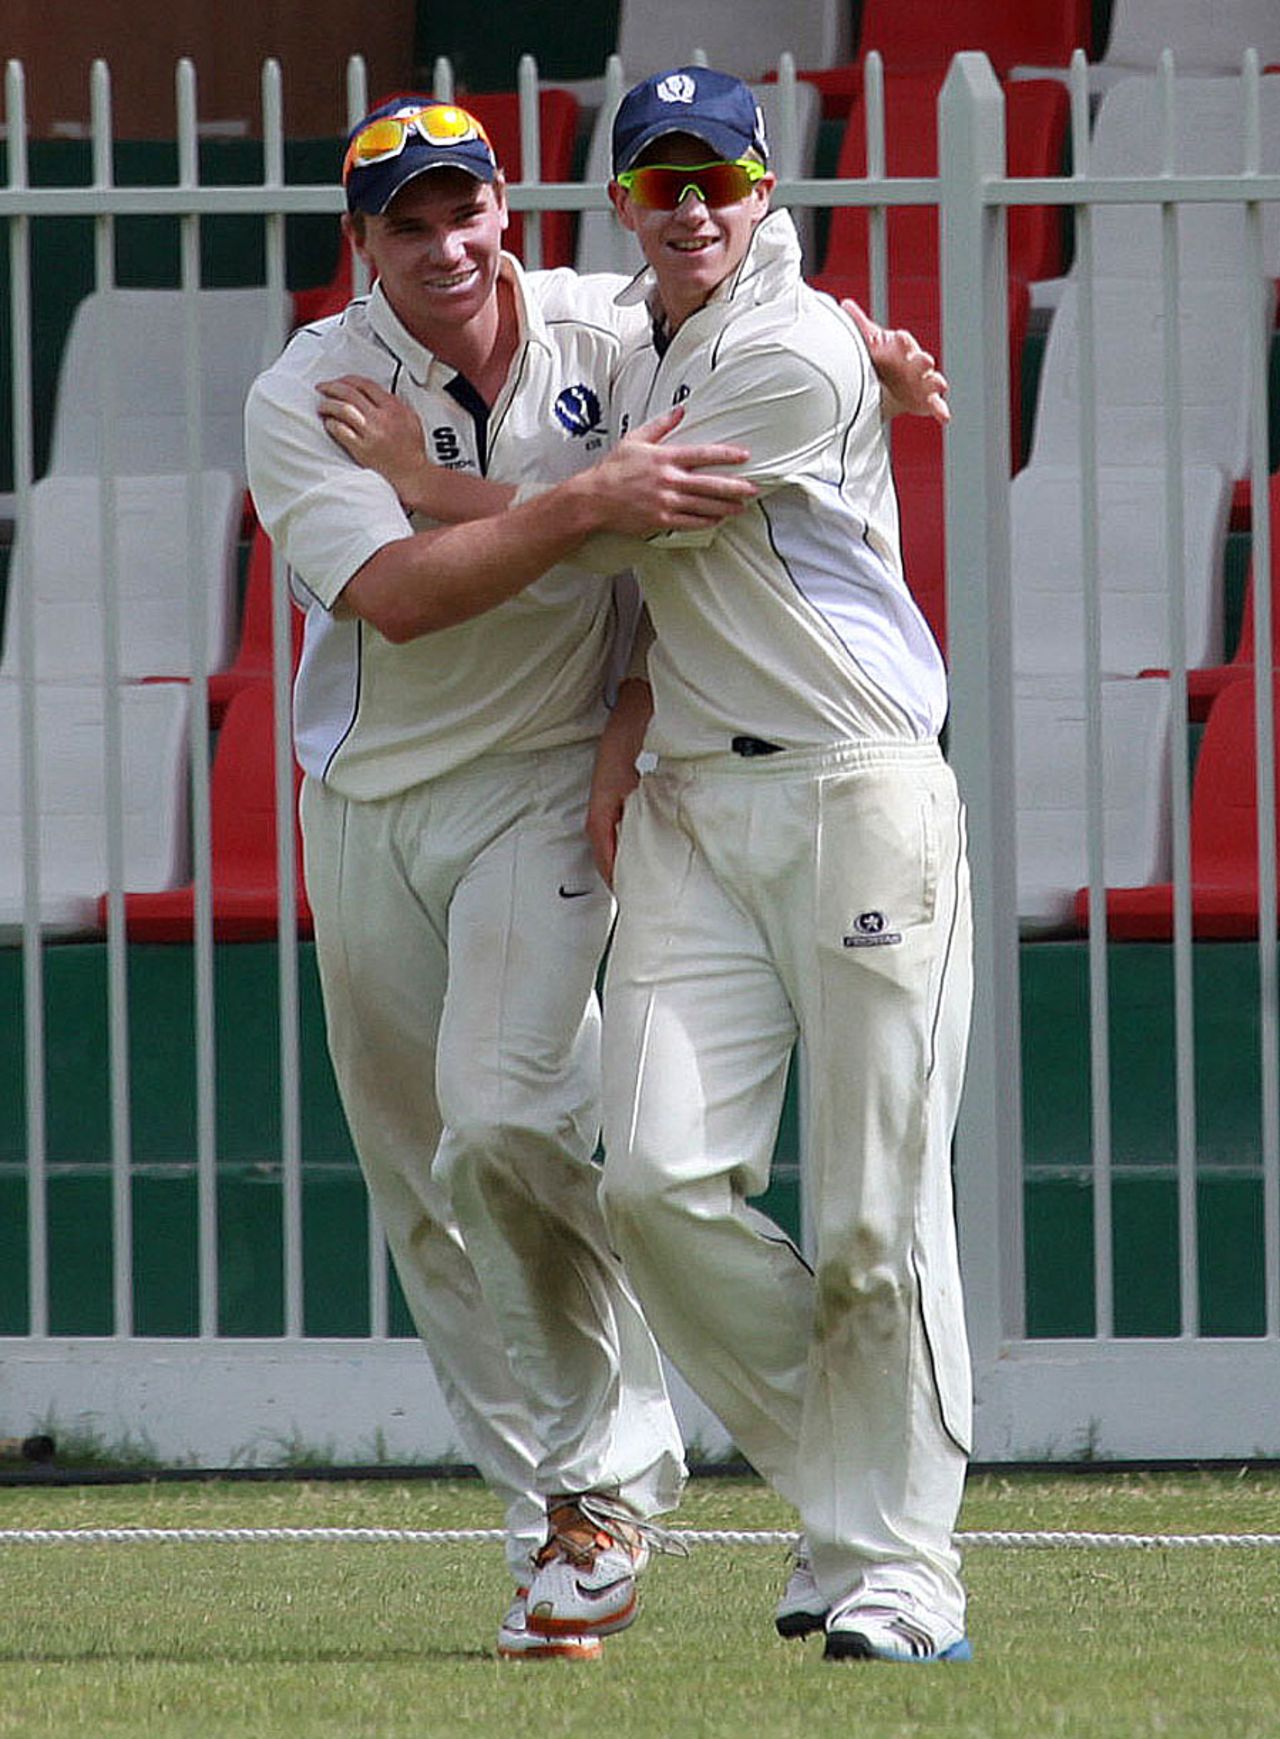 Ryan Flannigan celebrates with a team-mate after taking a catch, UAE v Scotland, Intercontinental Cup, 3rd day, Sharjah, February 18, 2012